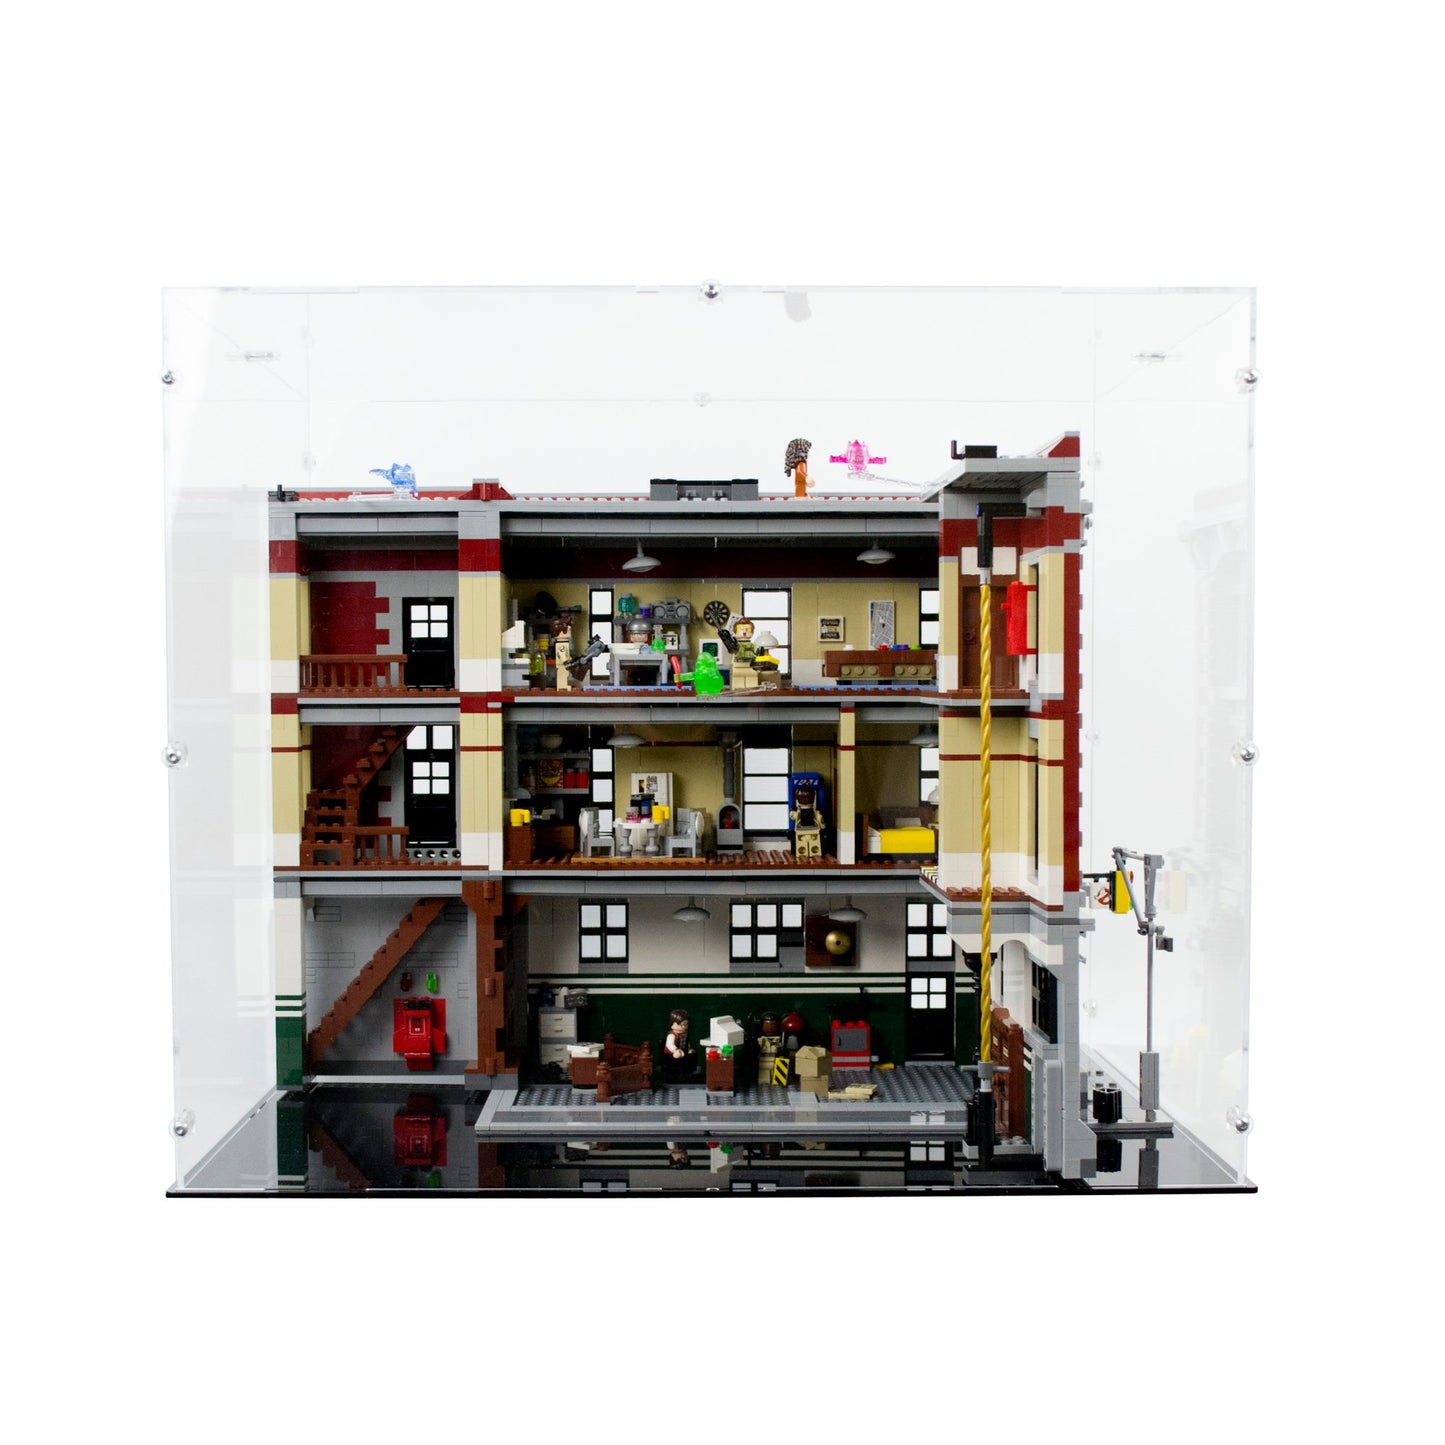 75827 Ghostbusters Firehouse HQ Display Case